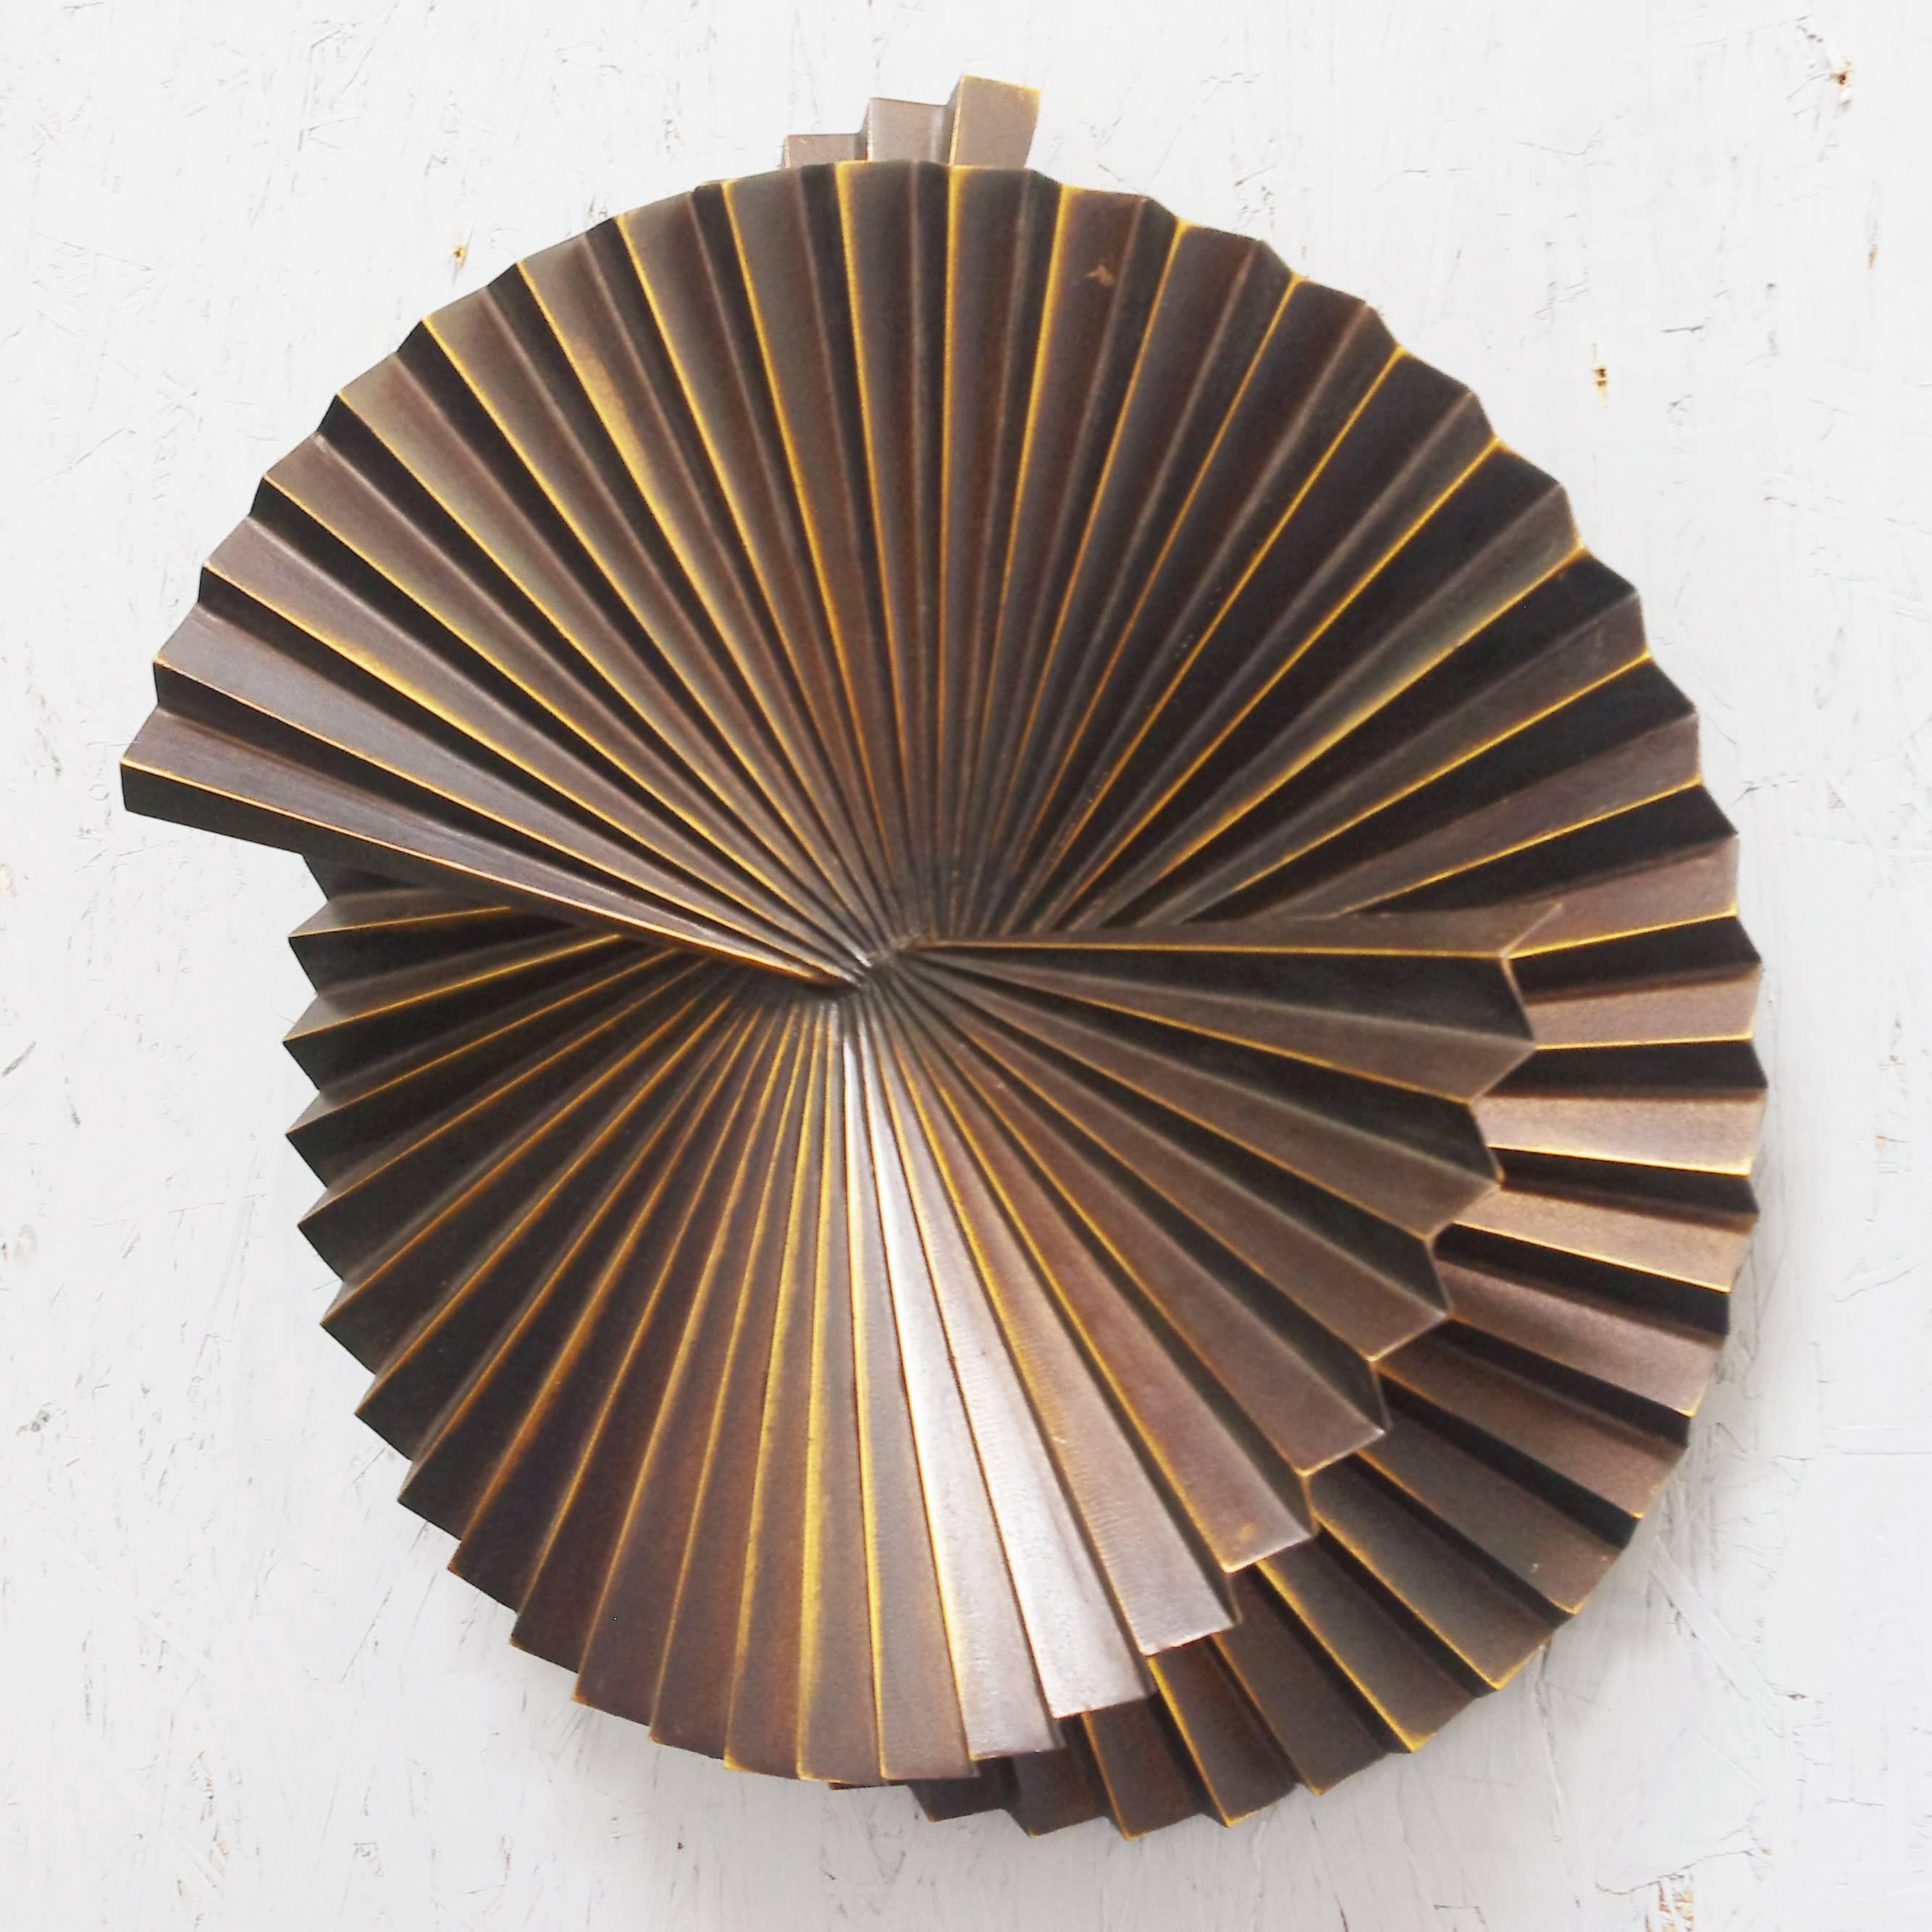 Limited edition pair of medium dark bronzed metal sconces or wall sculptures with spiral fan design / Designed by Fabio Bergomi for Fabio Ltd 
1 light / E26 or E27 type / max 60W
Diameter: 19 inches / Depth: 7 inches 
1 pair in stock in Palm Springs